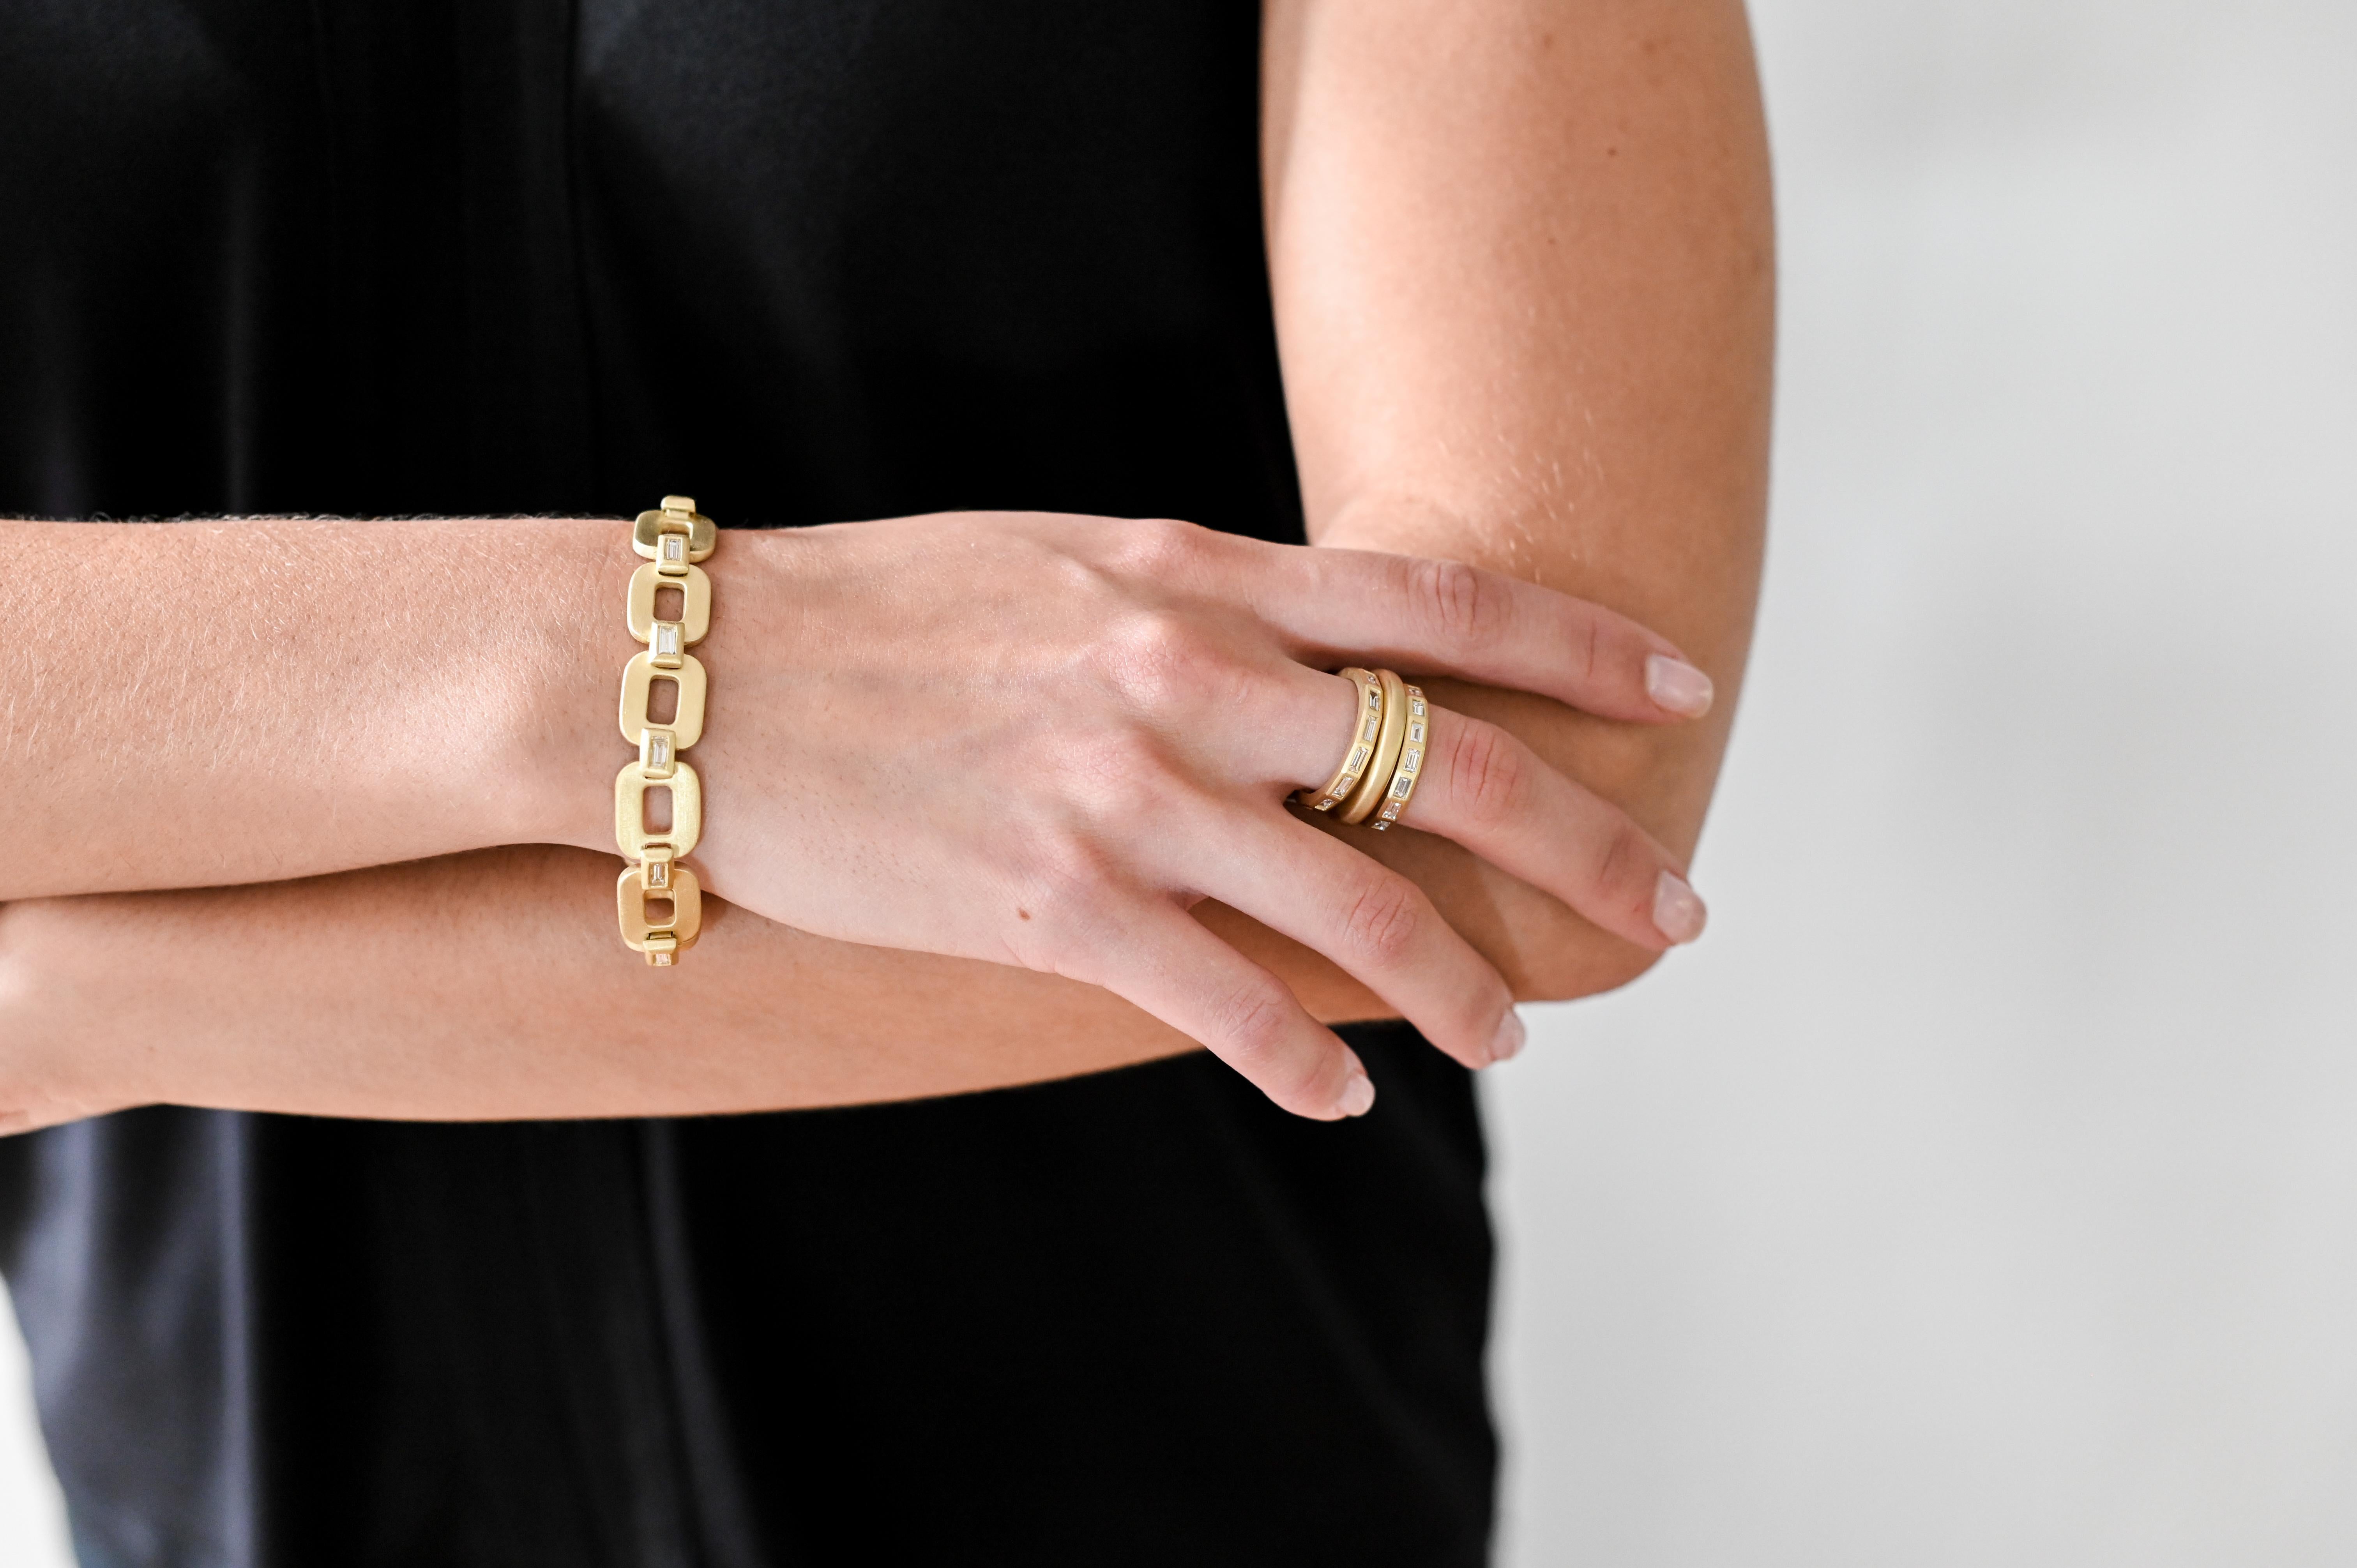 A modern-day classic! Faye Kim's handcrafted 18k gold link bracelet is quite substantial in weight and style. Each cushion-shaped link is polished, matte-finished and expertly linked with a Baguette diamond bezel. The clasp is skillfully crafted